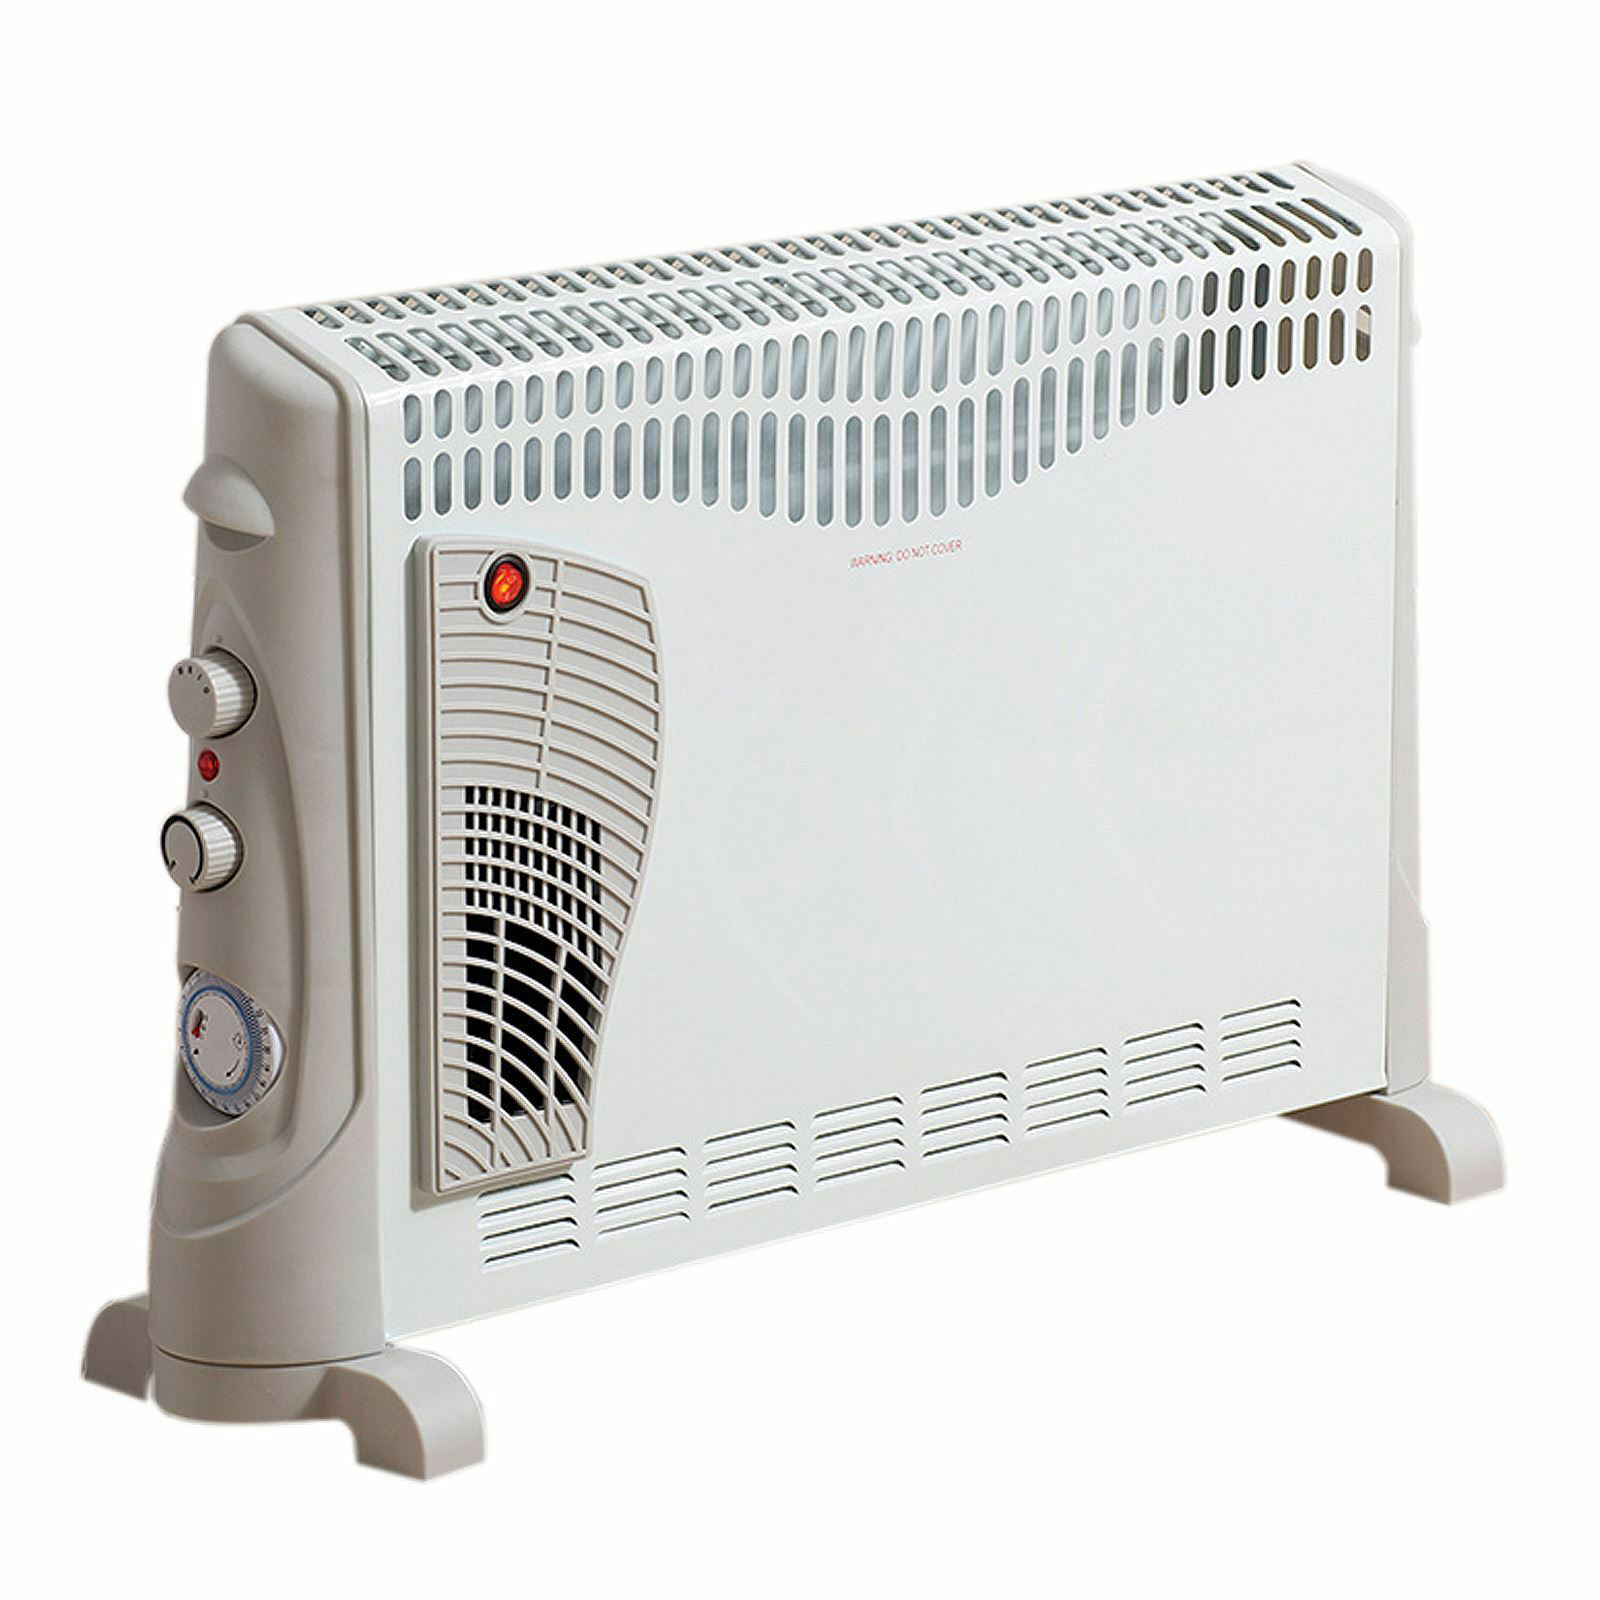 Image of Daewoo HEA1137GE 2 0kW Convector Heater with Turbo Fan and Timer